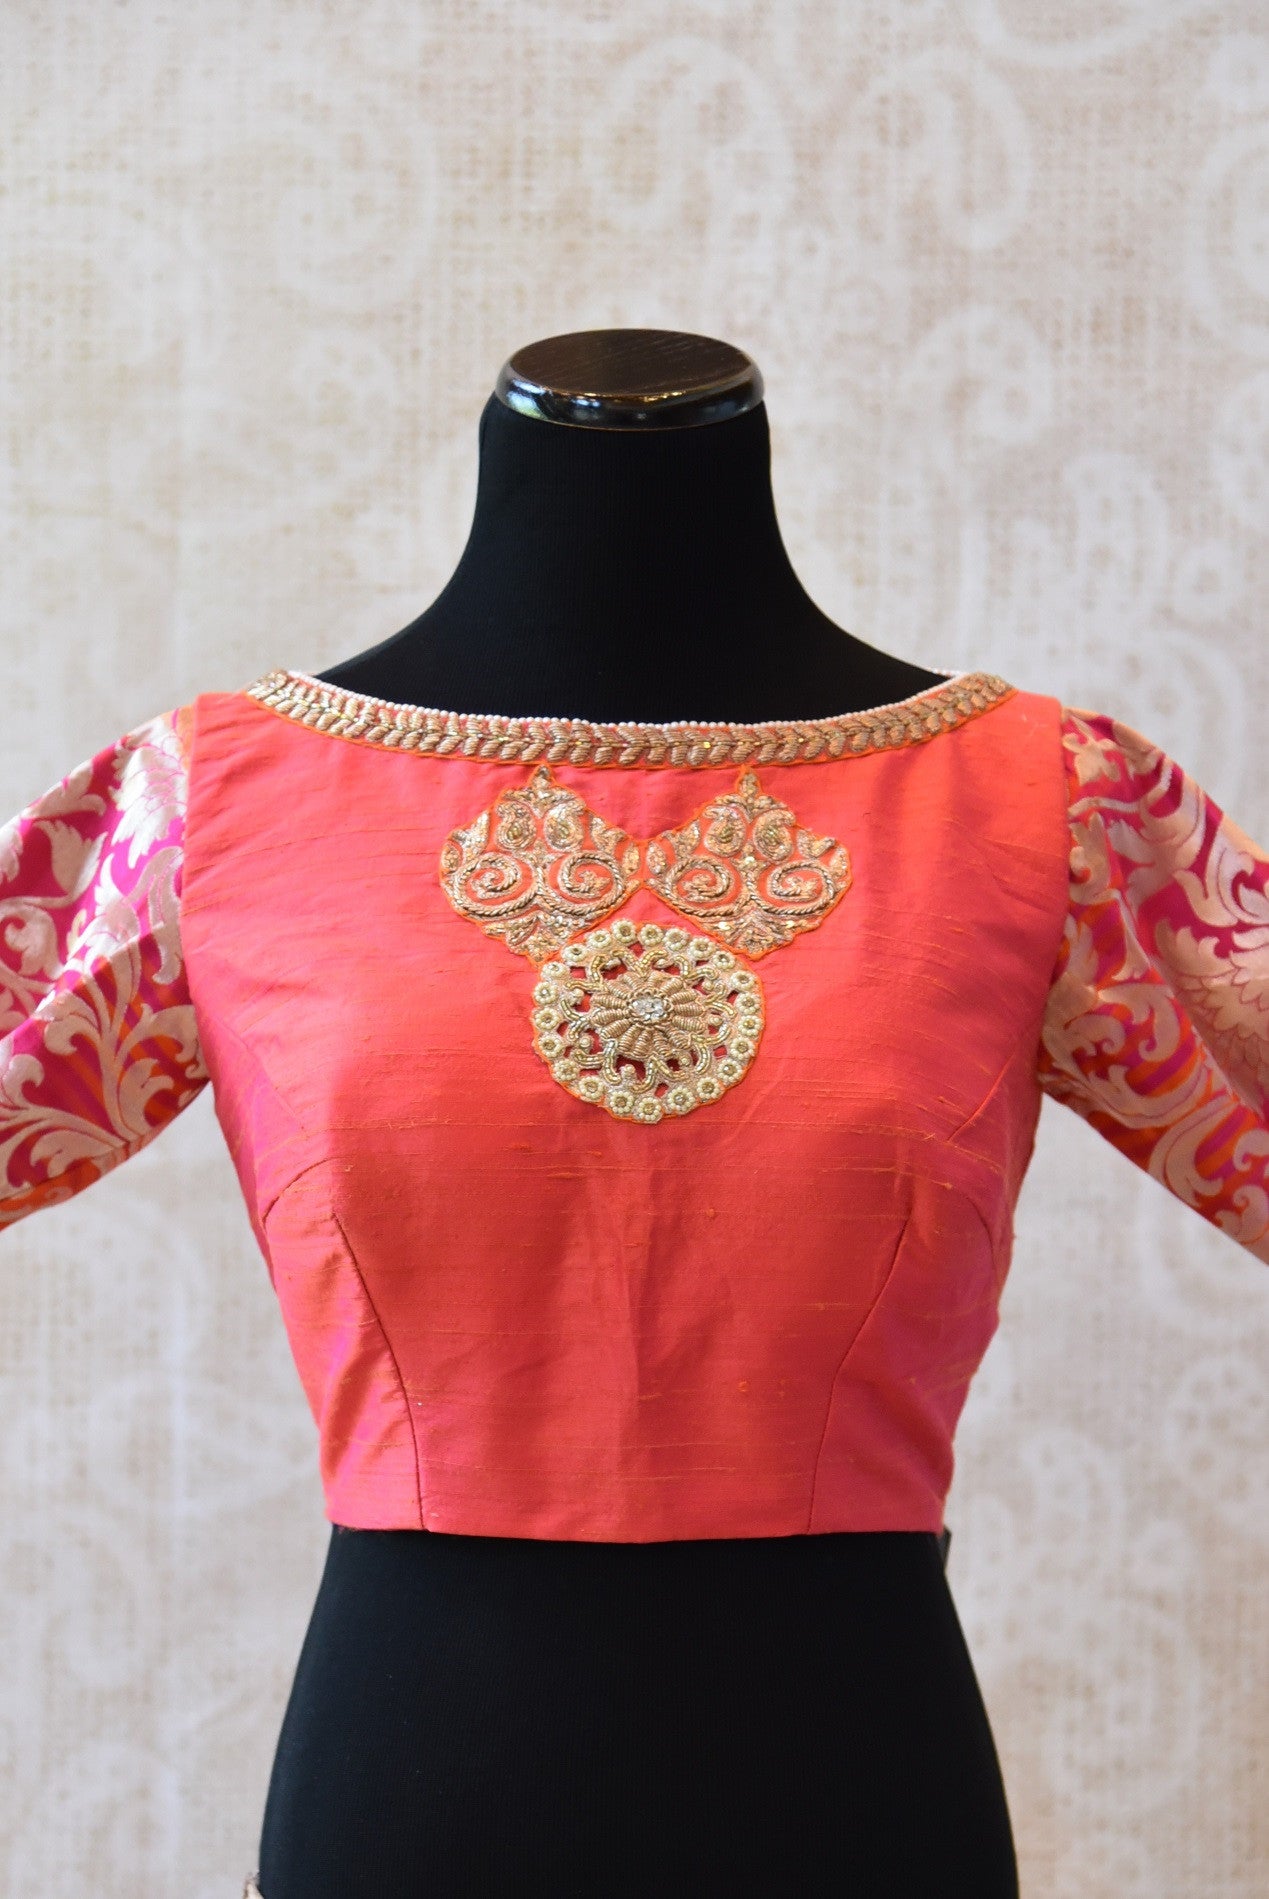 Shop this ethnic Indian raw silk blouse with brocade sleeves from Pure Elegance store in USA and online. It is perfect saree blouse to go for any wedding party. Boatneck.